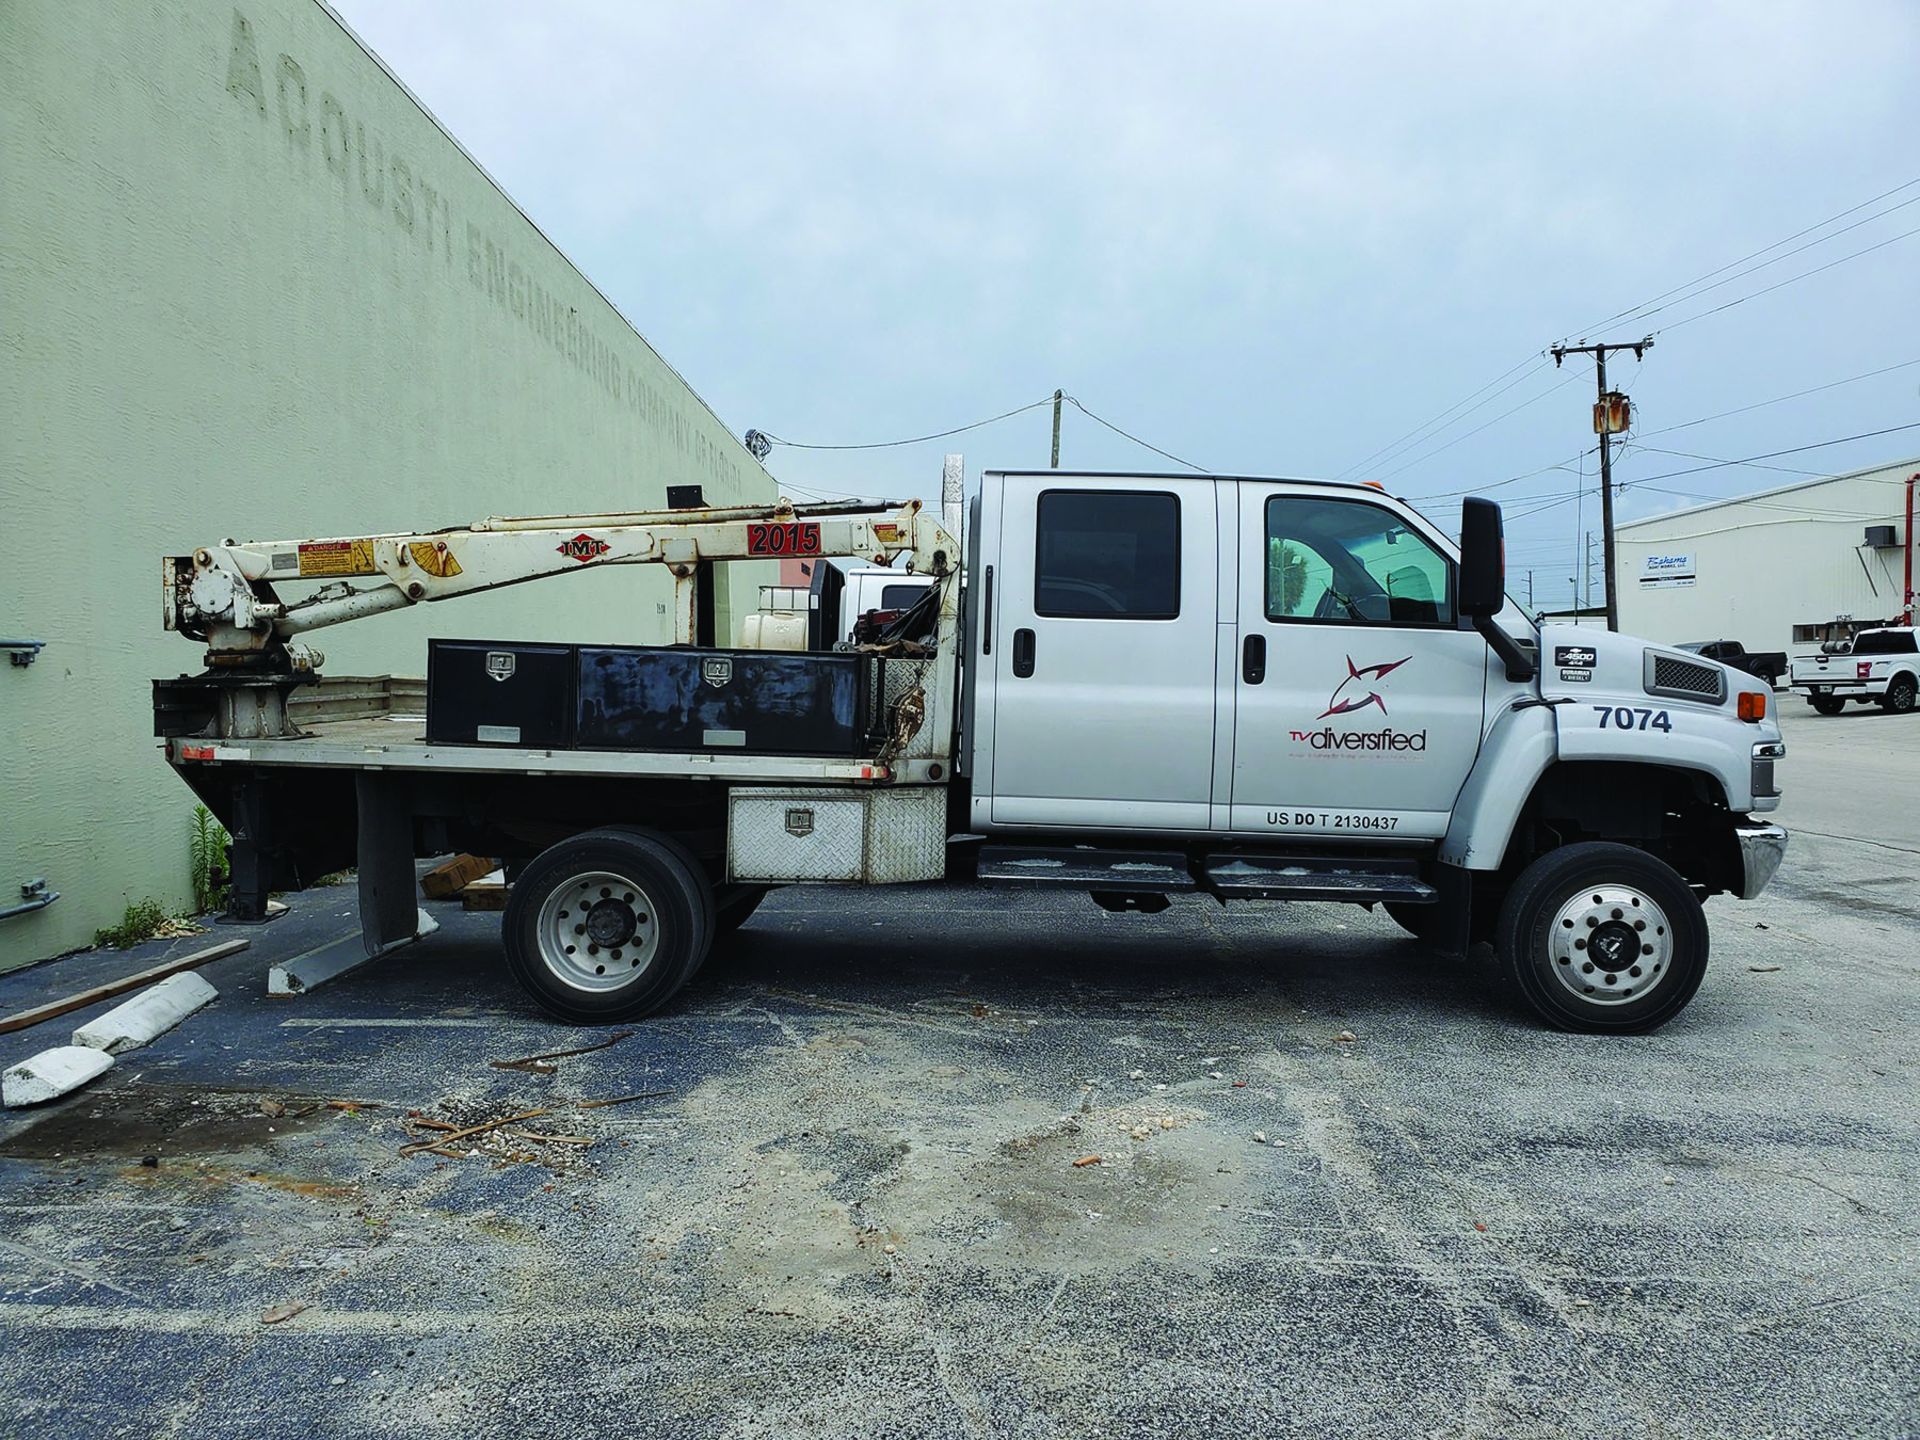 2006 CHEVROLET C4500 4X4 CREW CAB FLAT/STAKE BED TRUCK W/IMT 2015 TELESCOPING BOOM, 2.5 TON HOOK, - Image 11 of 19